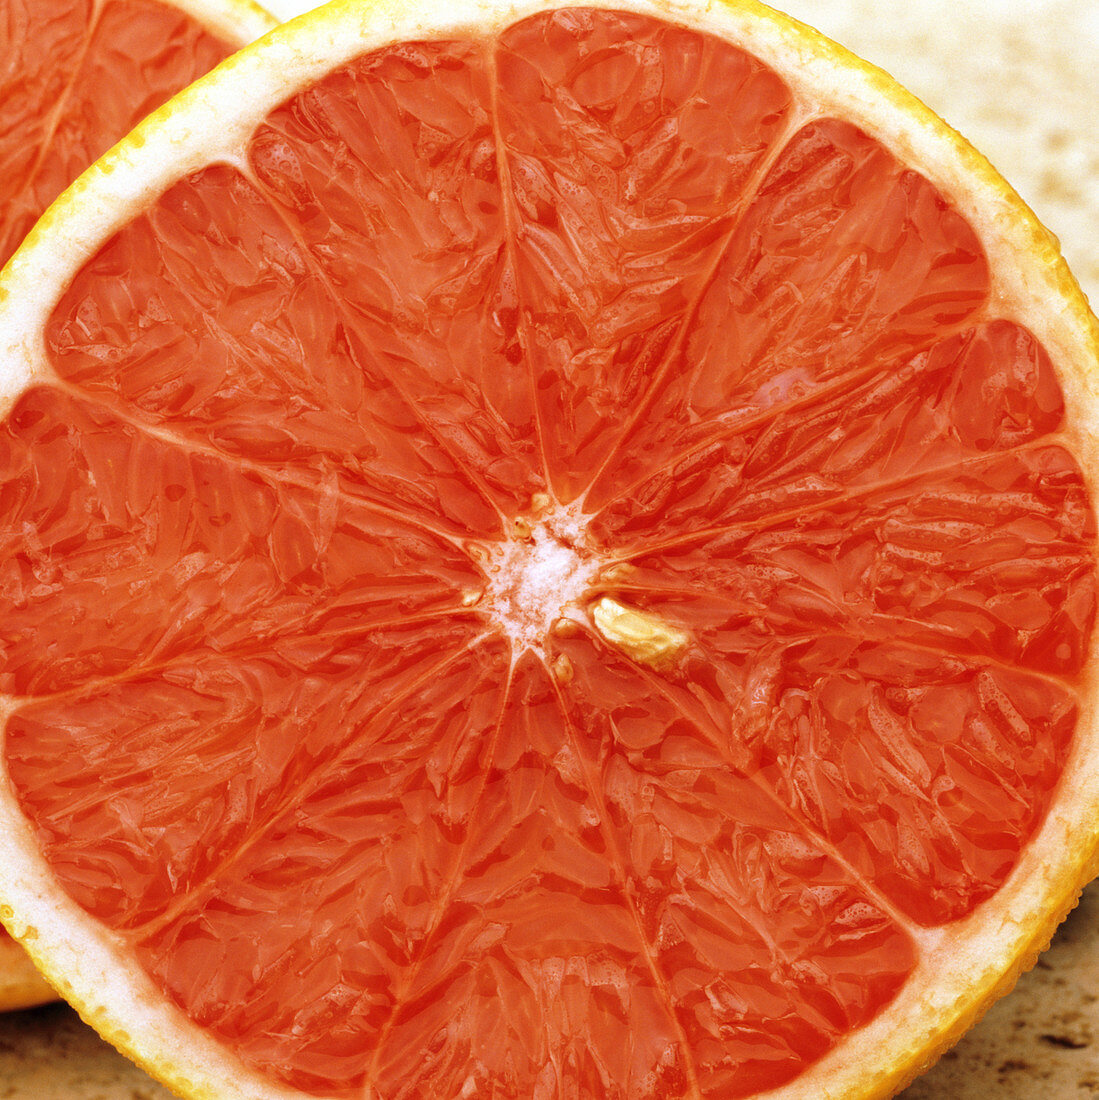 Grapefruit sliced in two